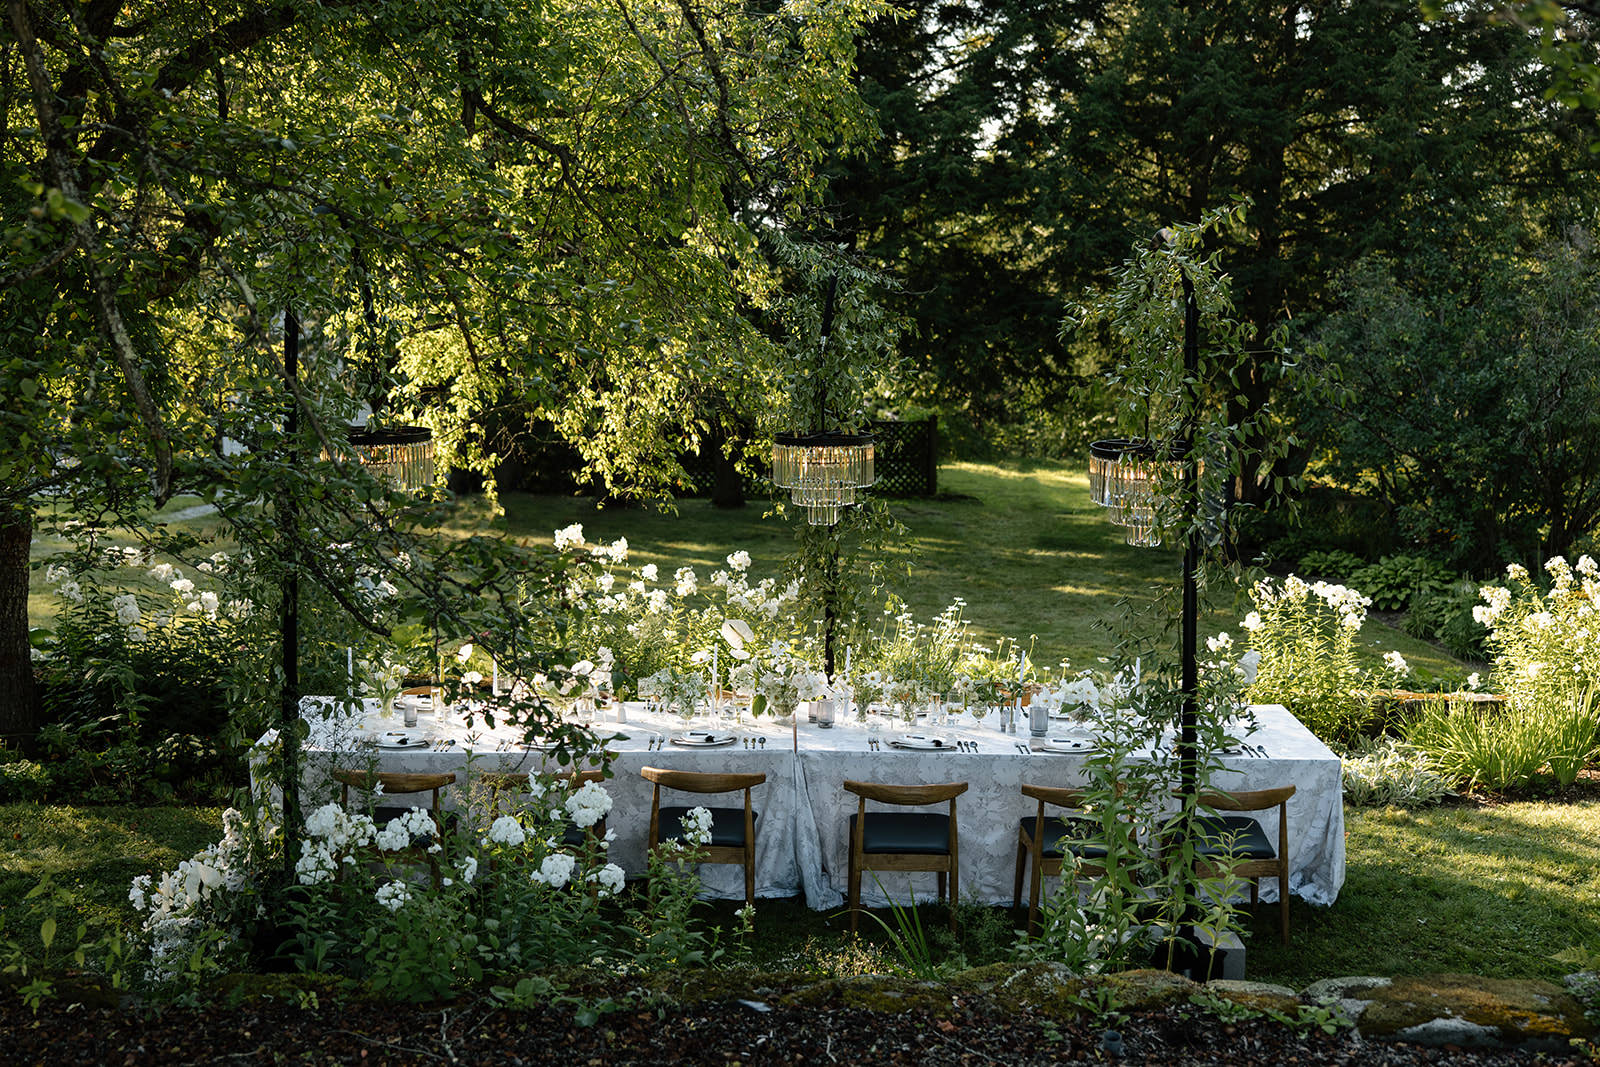 Luxury dinner at intimate wedding or elopement. Elopement and backyard intimate wedding ideas.